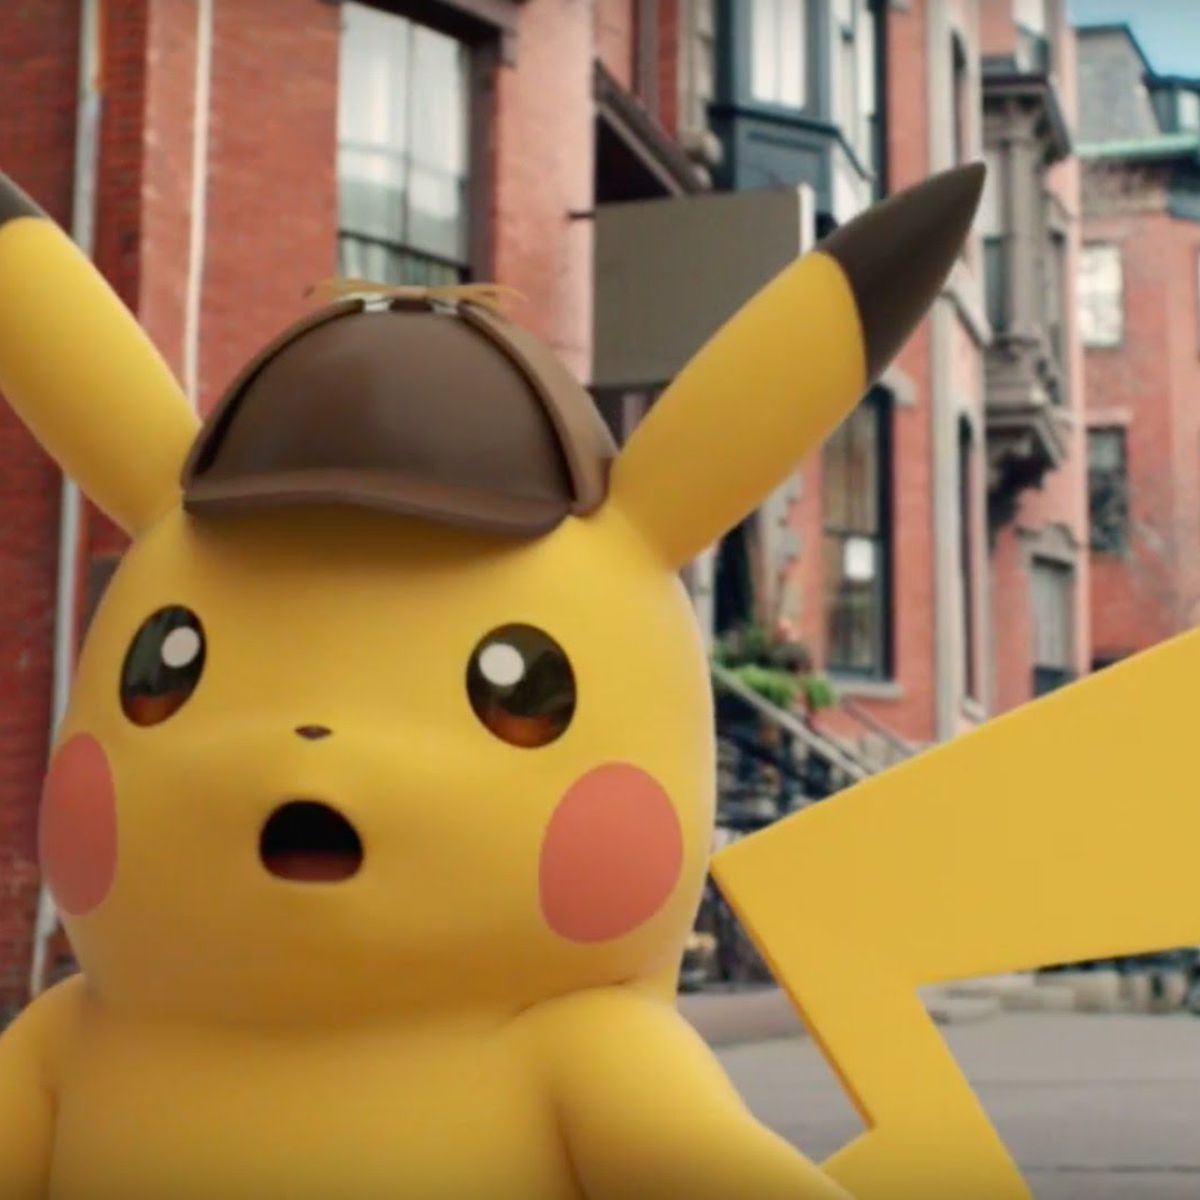 Detective Pikachu has a surprised expression on his face.